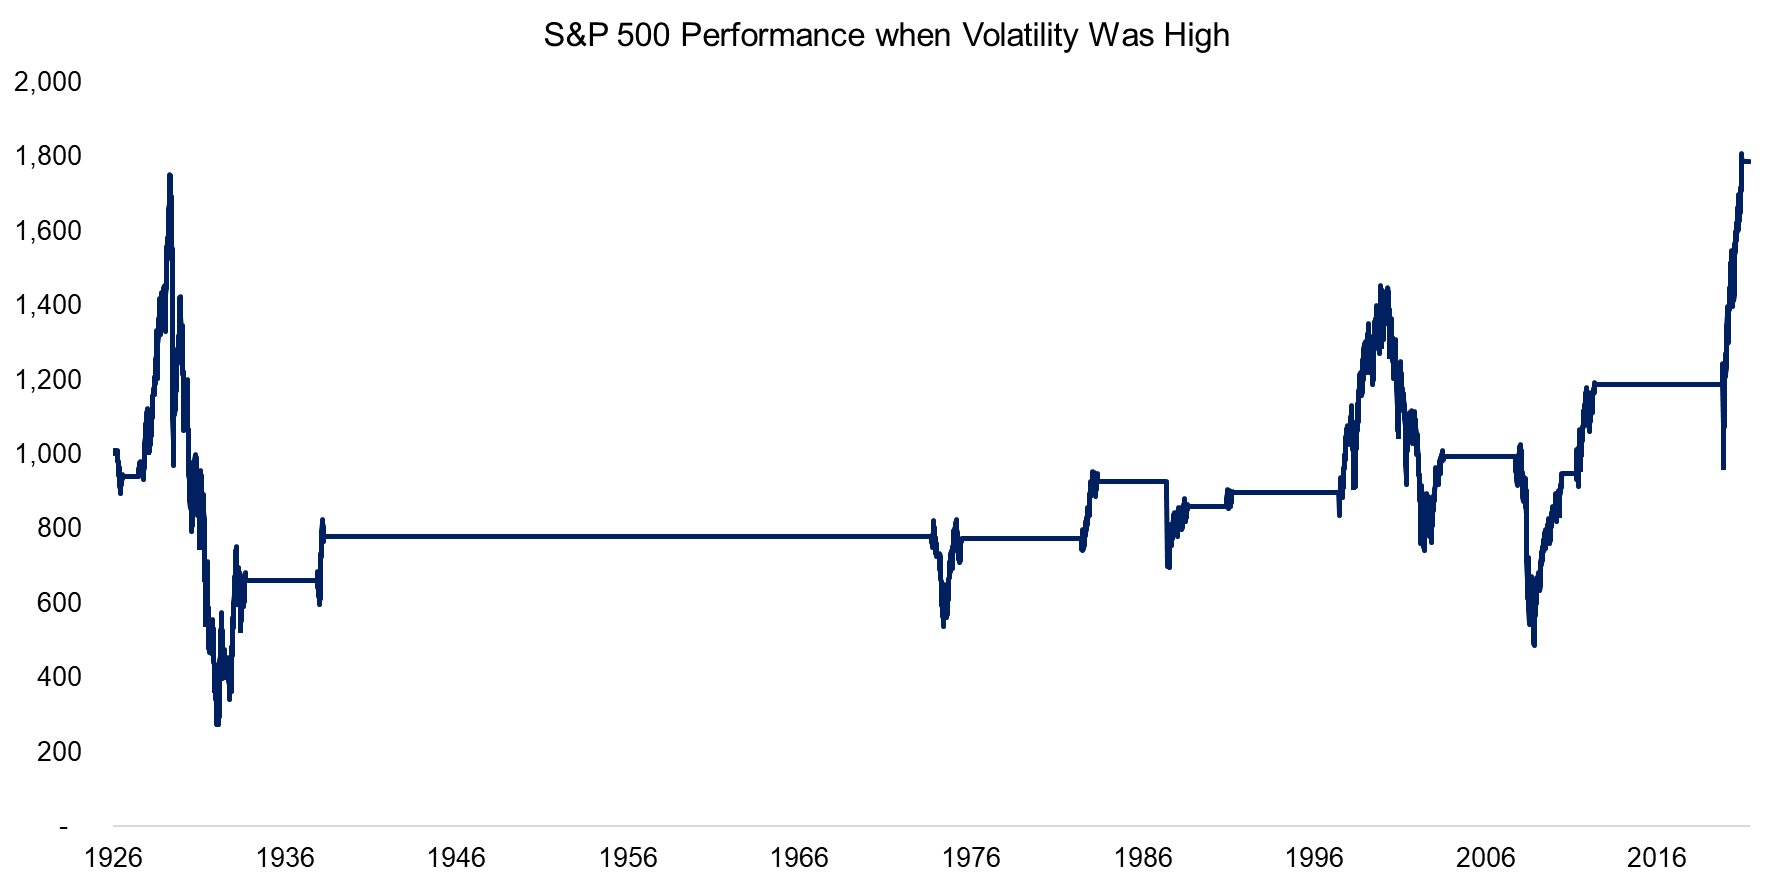 S&P 500 Performance when Volatility Was High